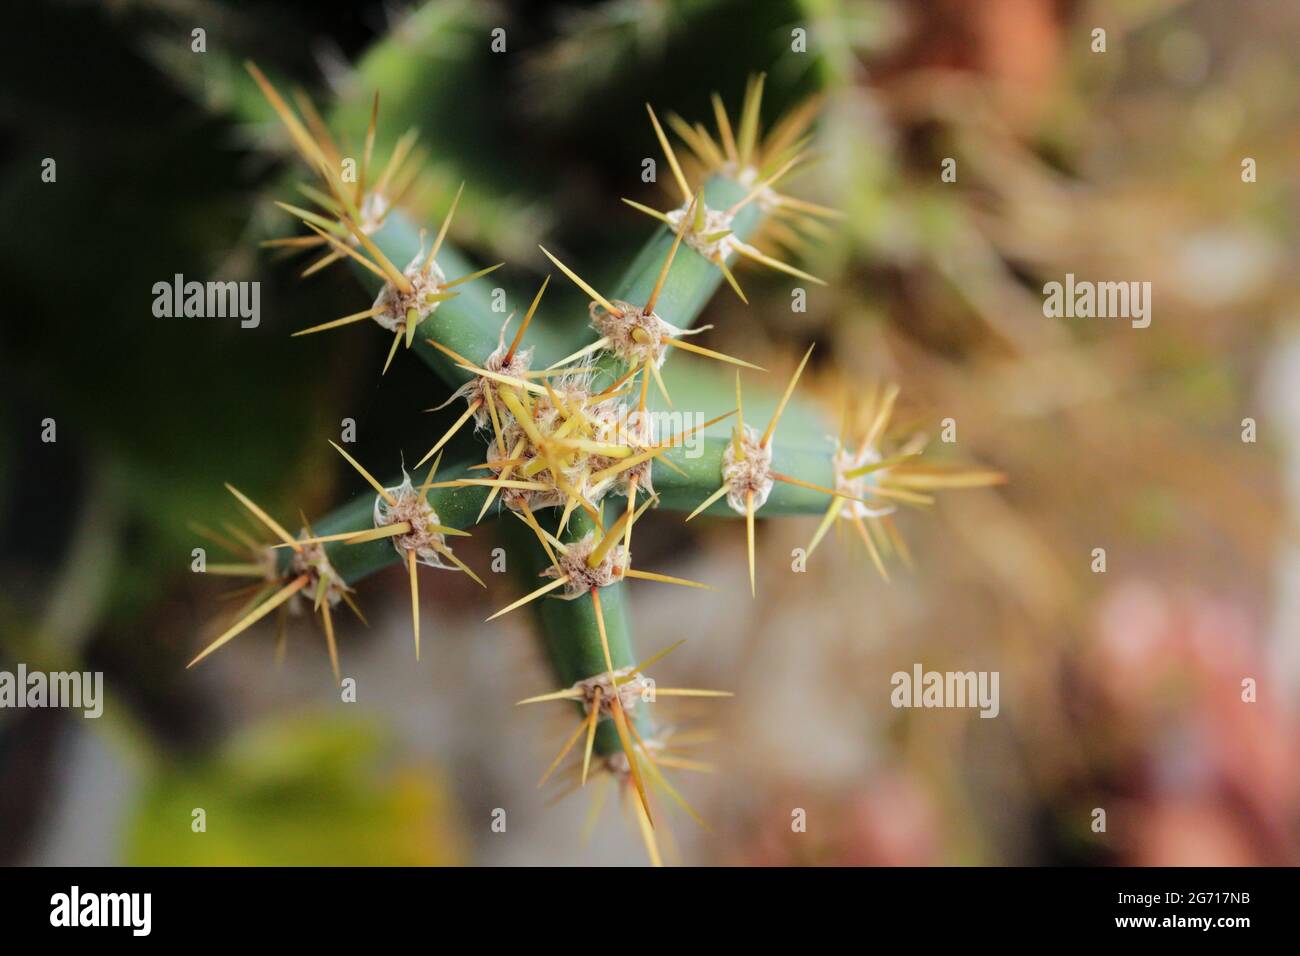 Top view of cactus plant, cactus in the garden Stock Photo